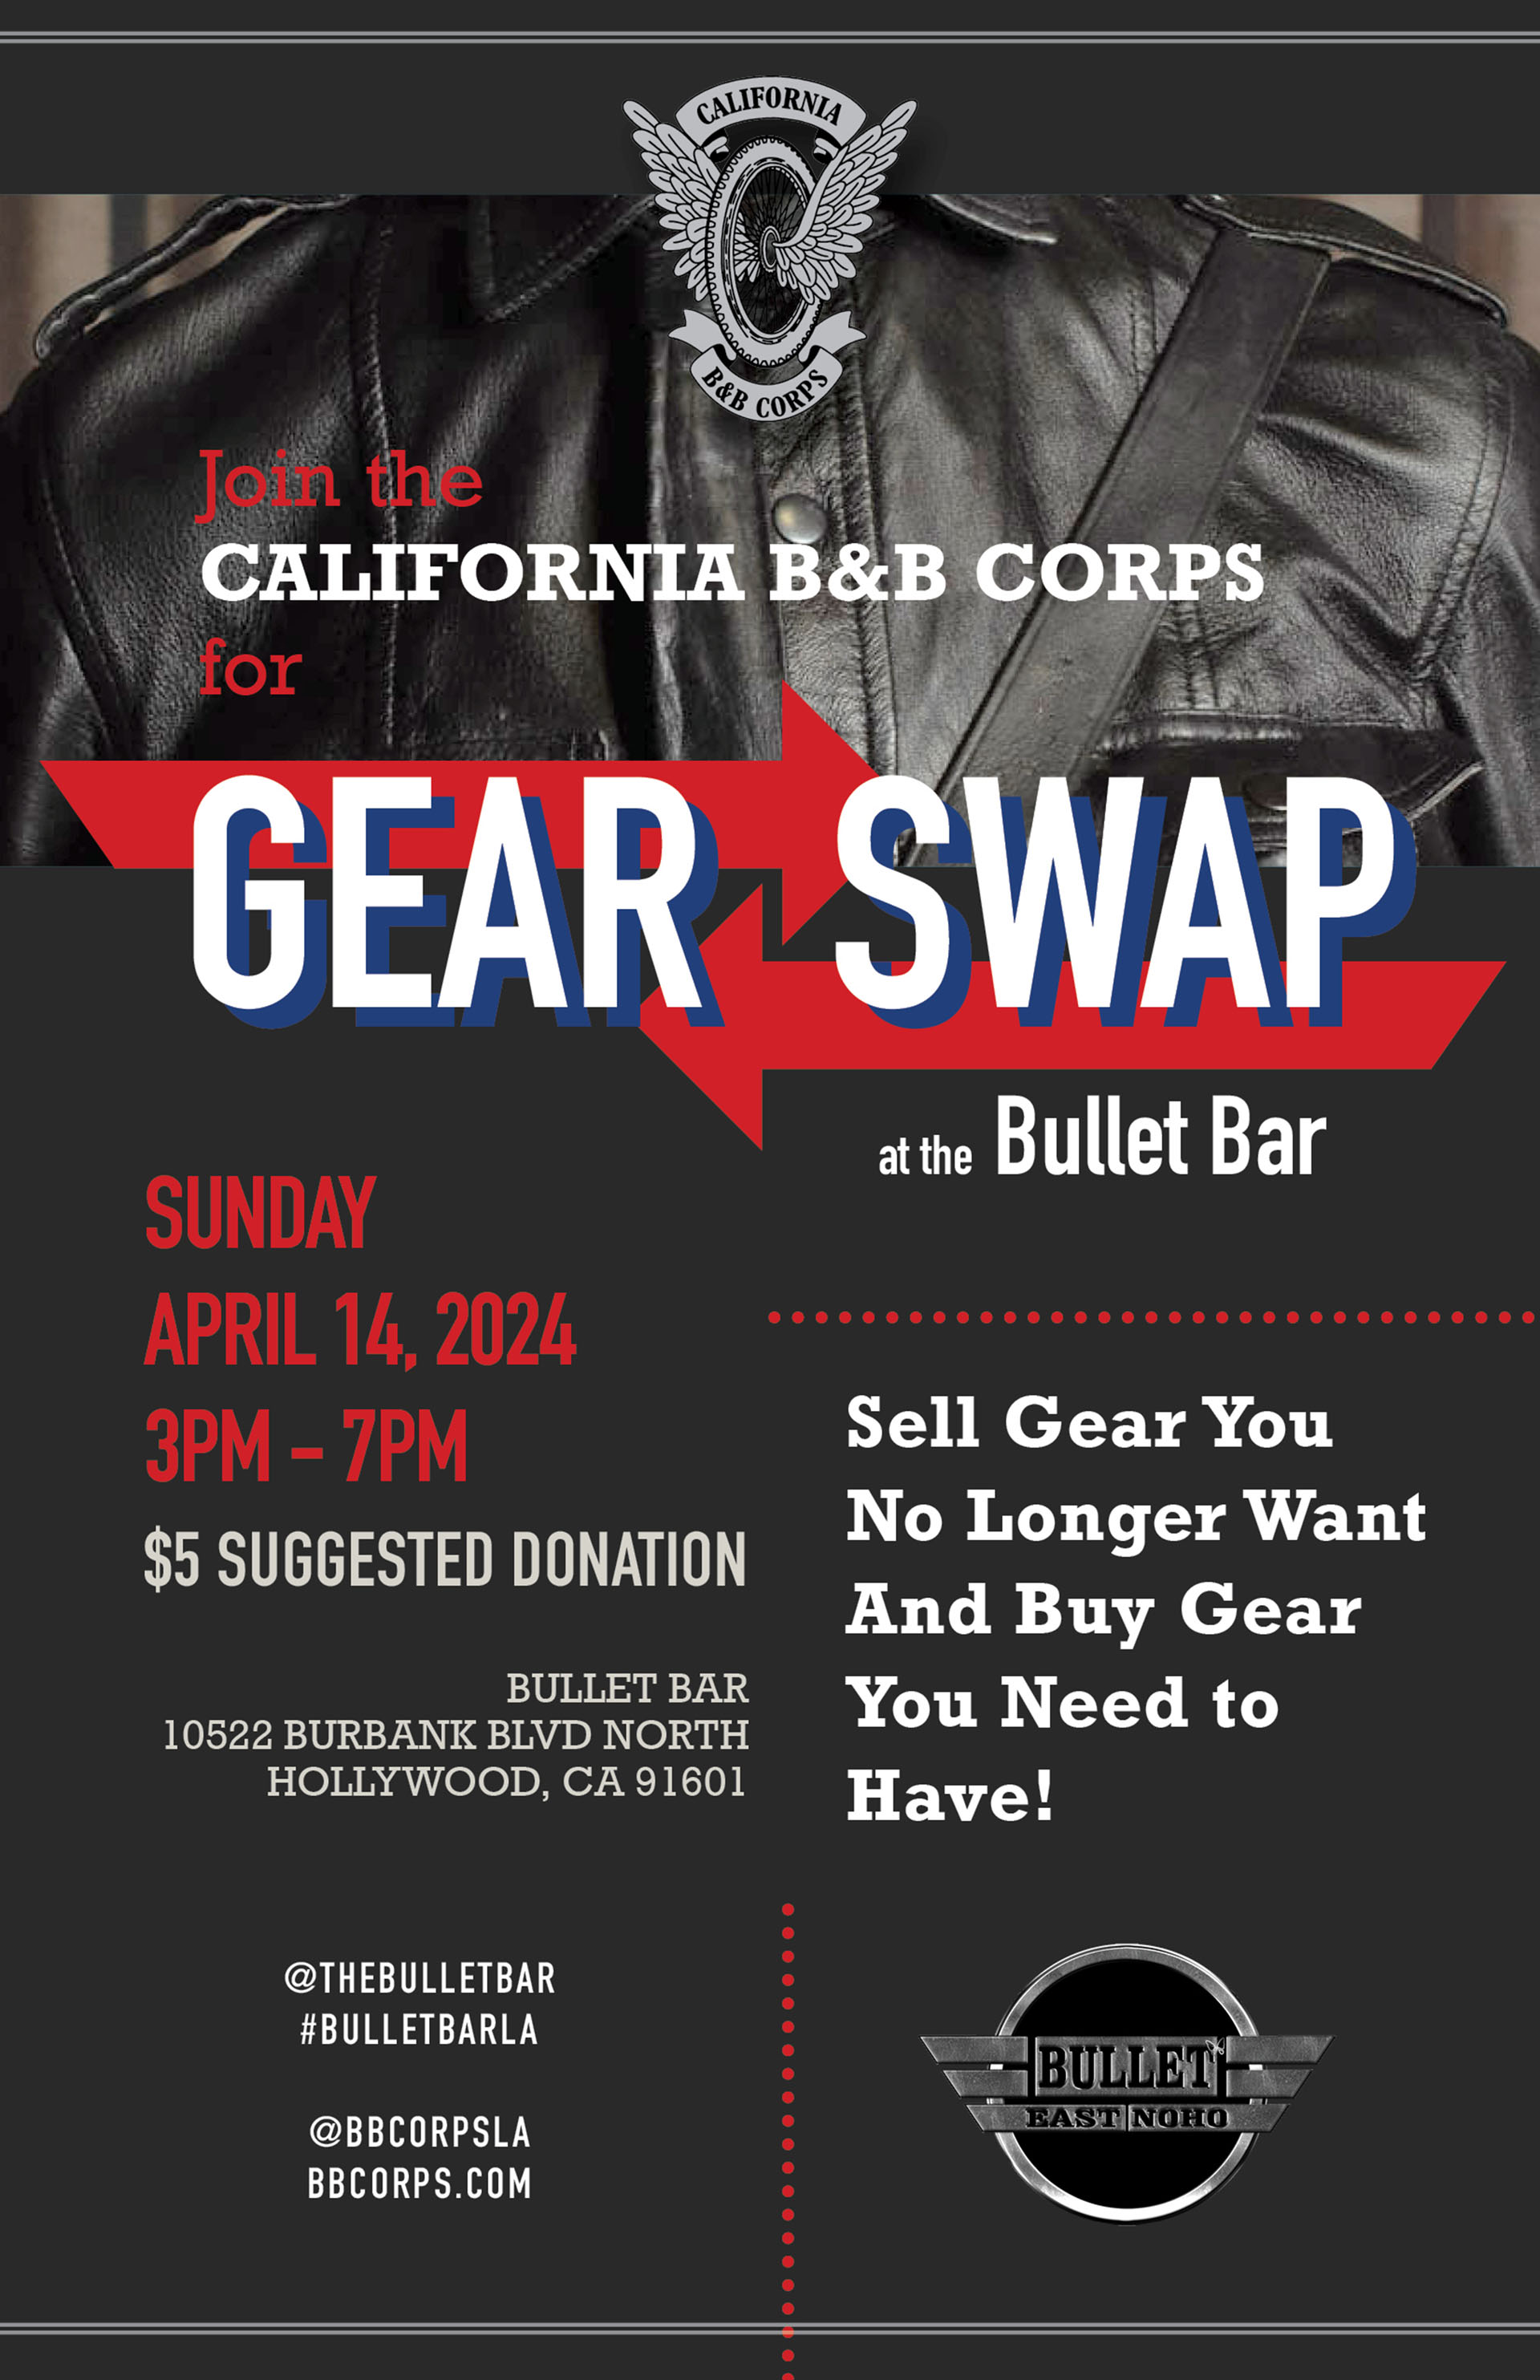 Join the CALIFORNIA B&B CORPS for GEAR SWAP at THE BULLET BAR: Sunday, 04/14/24 from 3:00 PM to 7:00 PM. $5 suggested donation.